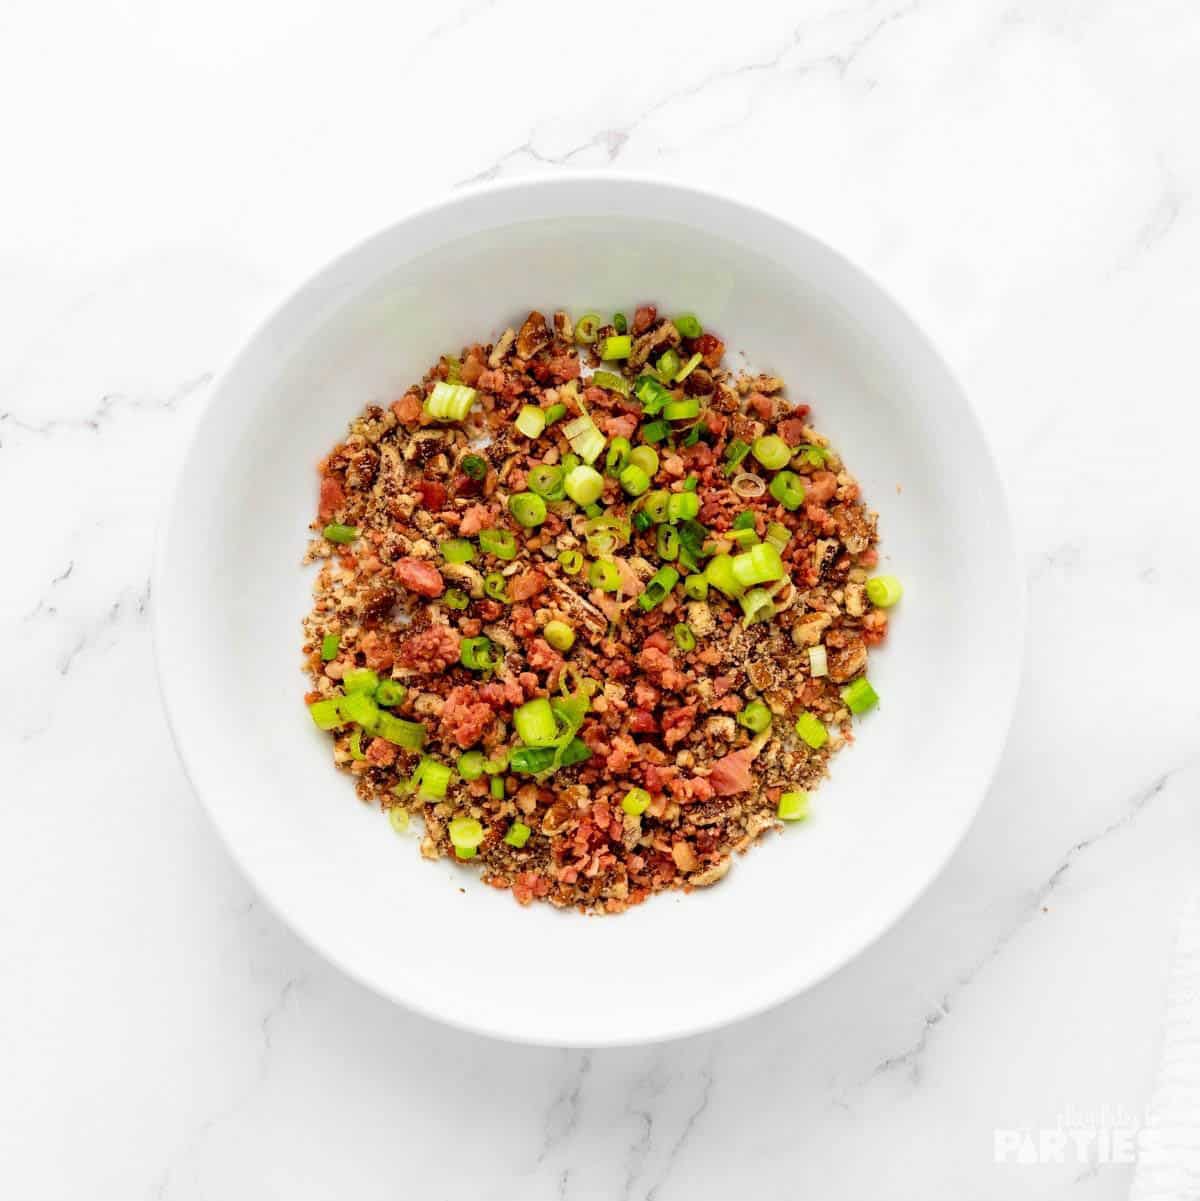 Chopped bacon, green onions, and pecan pieces in a shallow bowl.